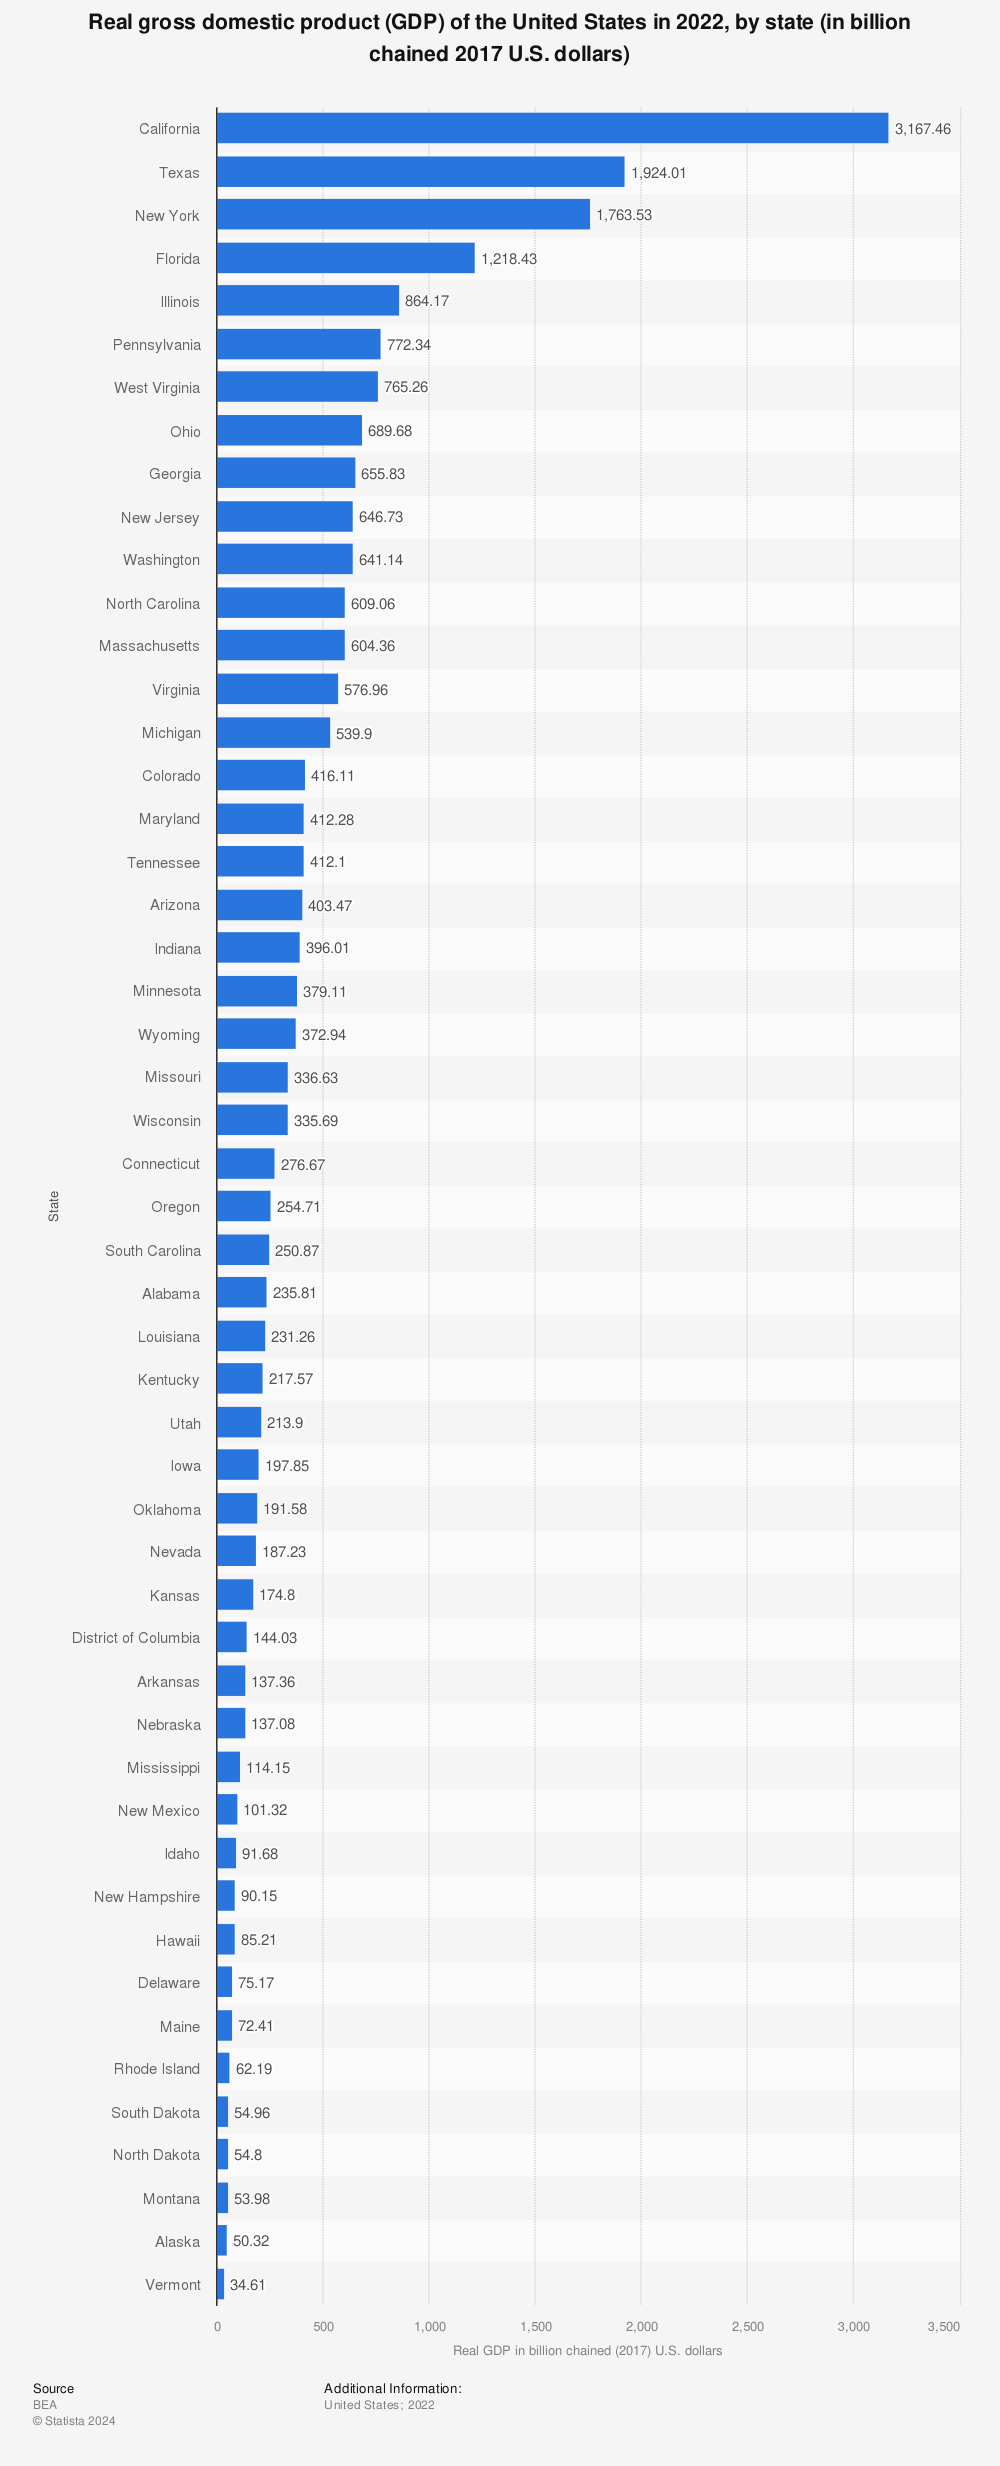 Statistic: Real Gross Domestic Product (GDP) of the United States in Q3 2022, by state (in billion chained 2012 U.S. dollars) | Statista